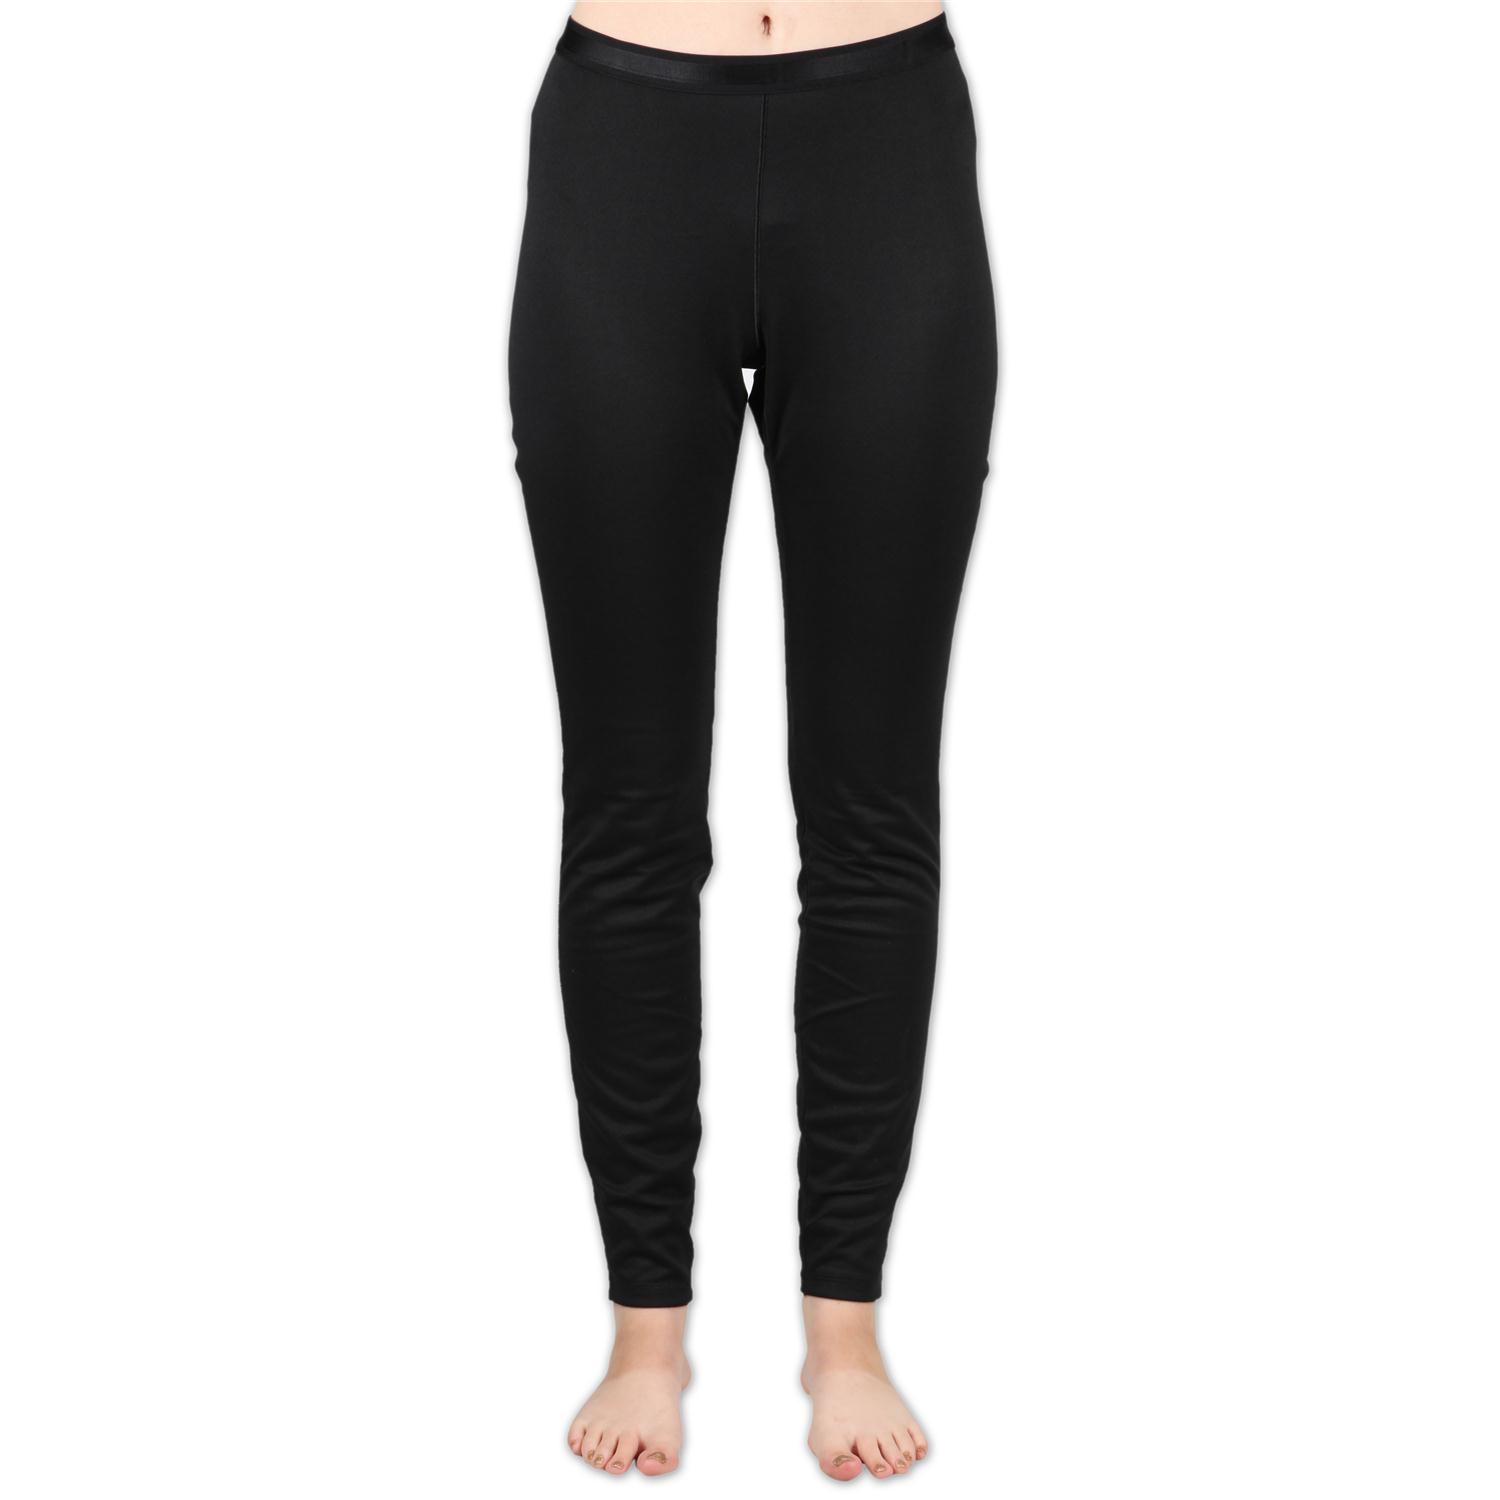 Patagonia Capilene 3 Midweight Baselayer Pants - Women's | evo outlet